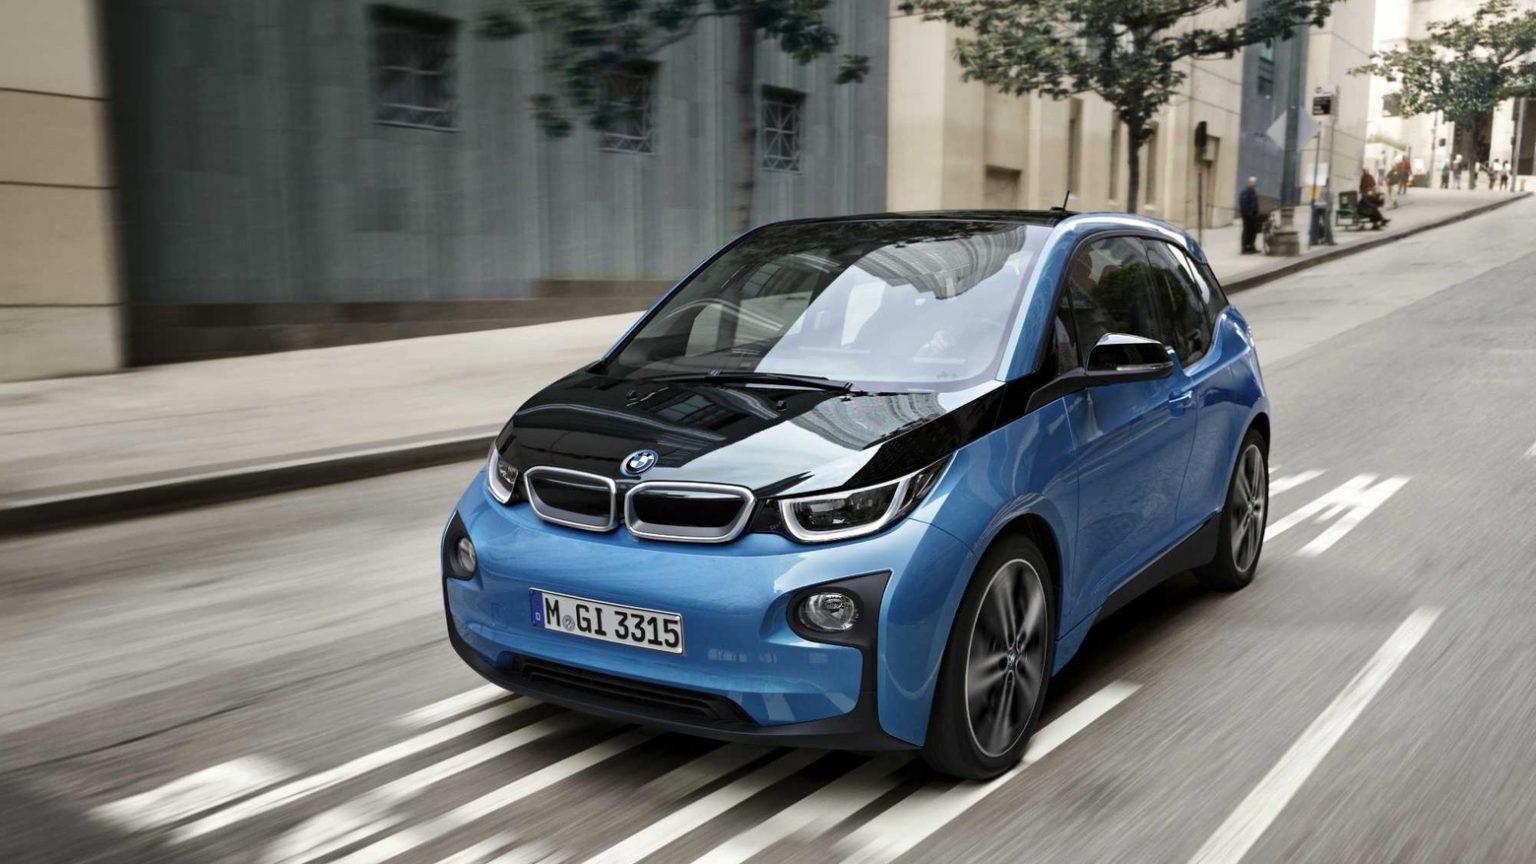 The BMW i3 electric vehicle could someday be joined on the road by an Apple car.